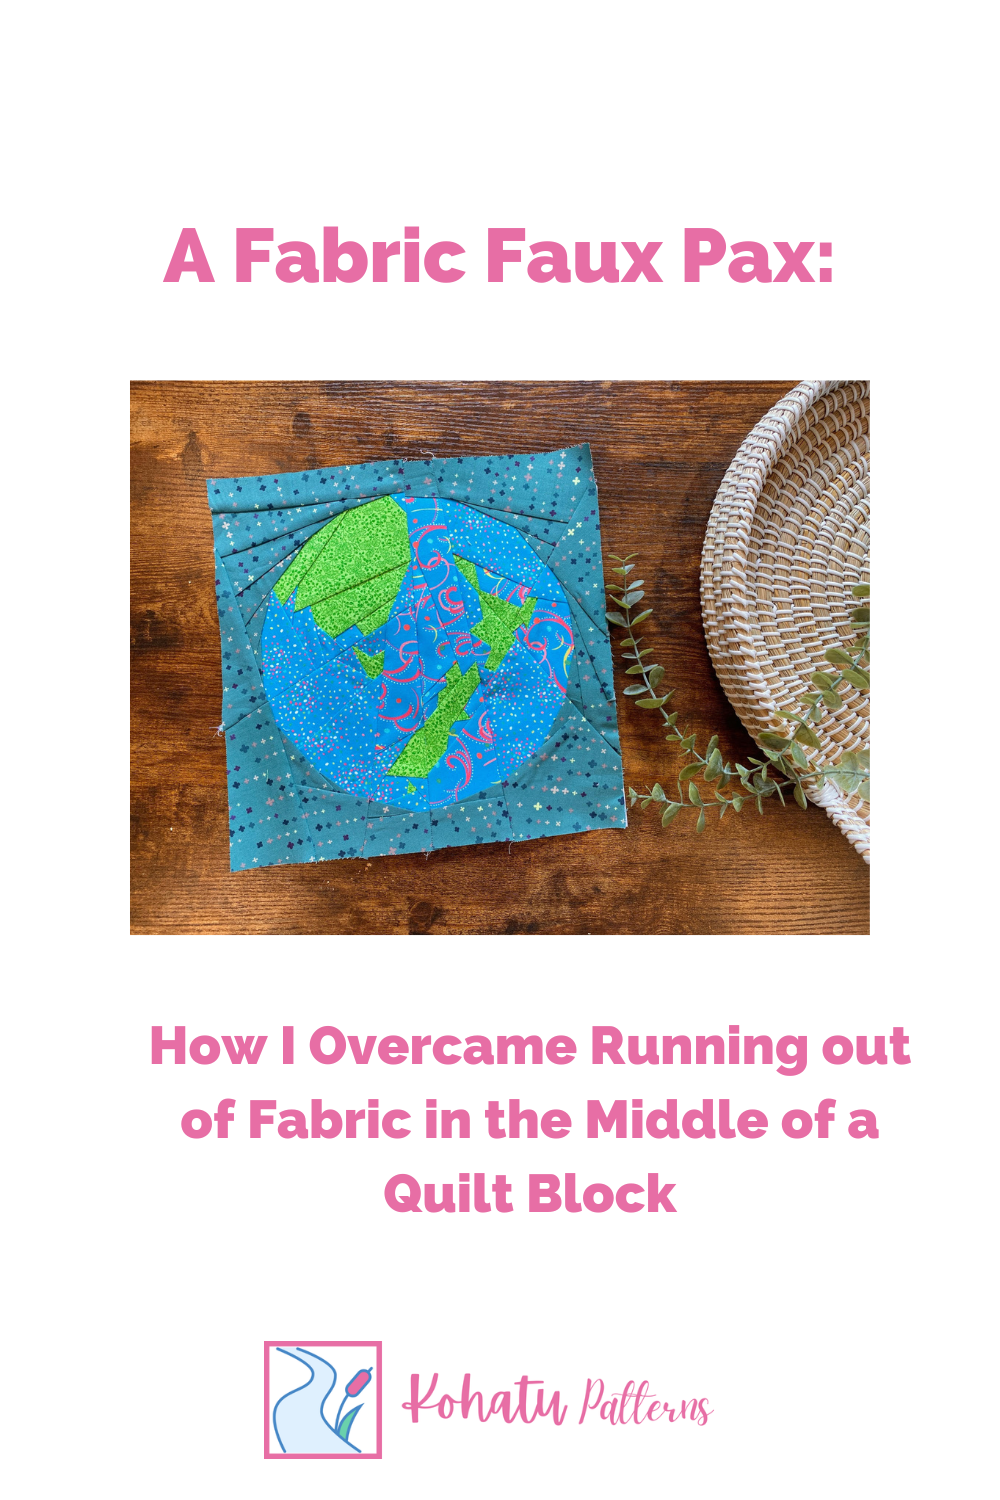 Follow my journey as I run out of fabric, desperately search for more and what I learned from running out of fabric while making a planet earth quilt block for my Outer Space Adventure quilt.